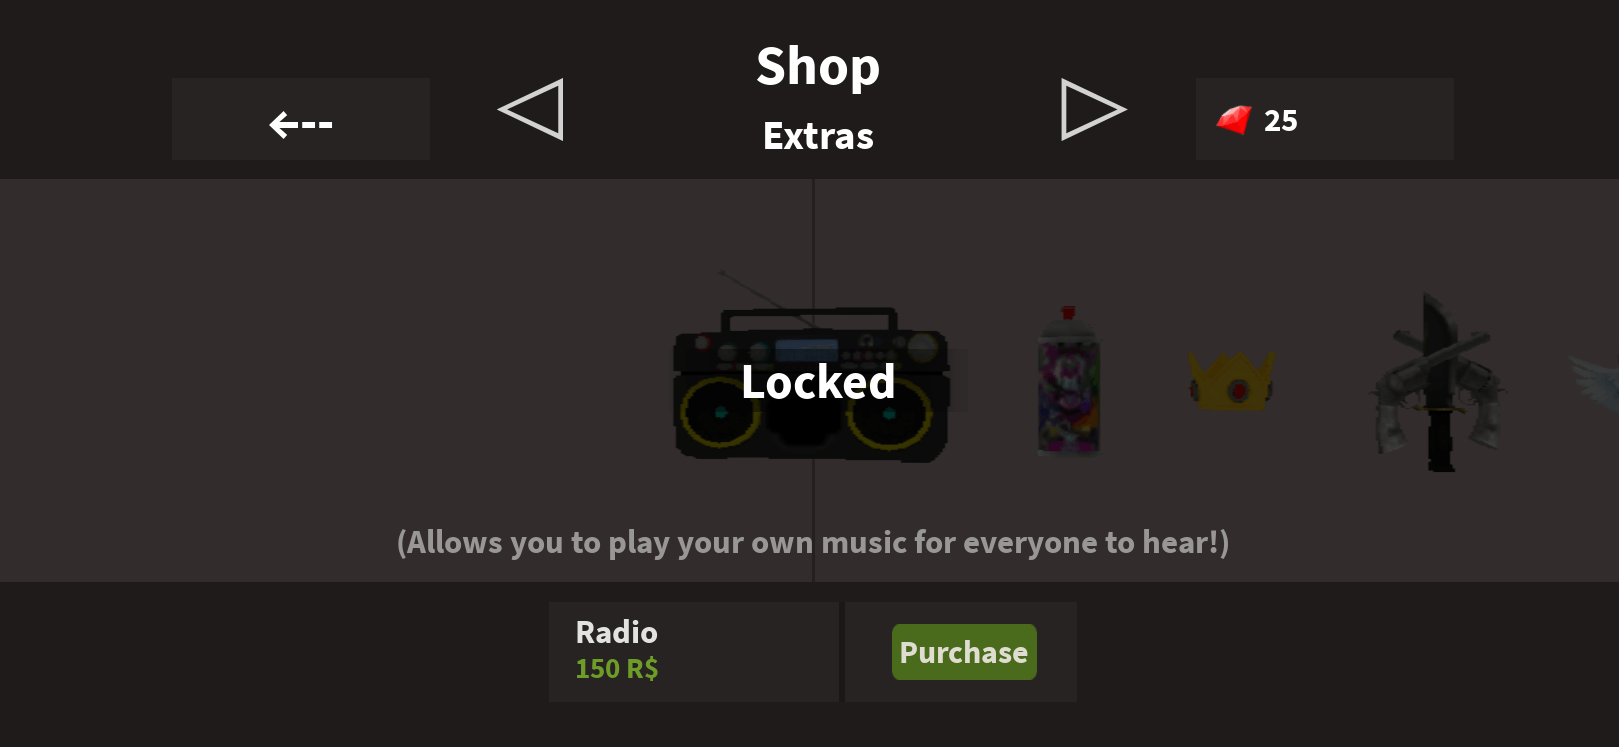 To use Music ID Codes in KAT! all players must spend 150 Robux on the Radio...